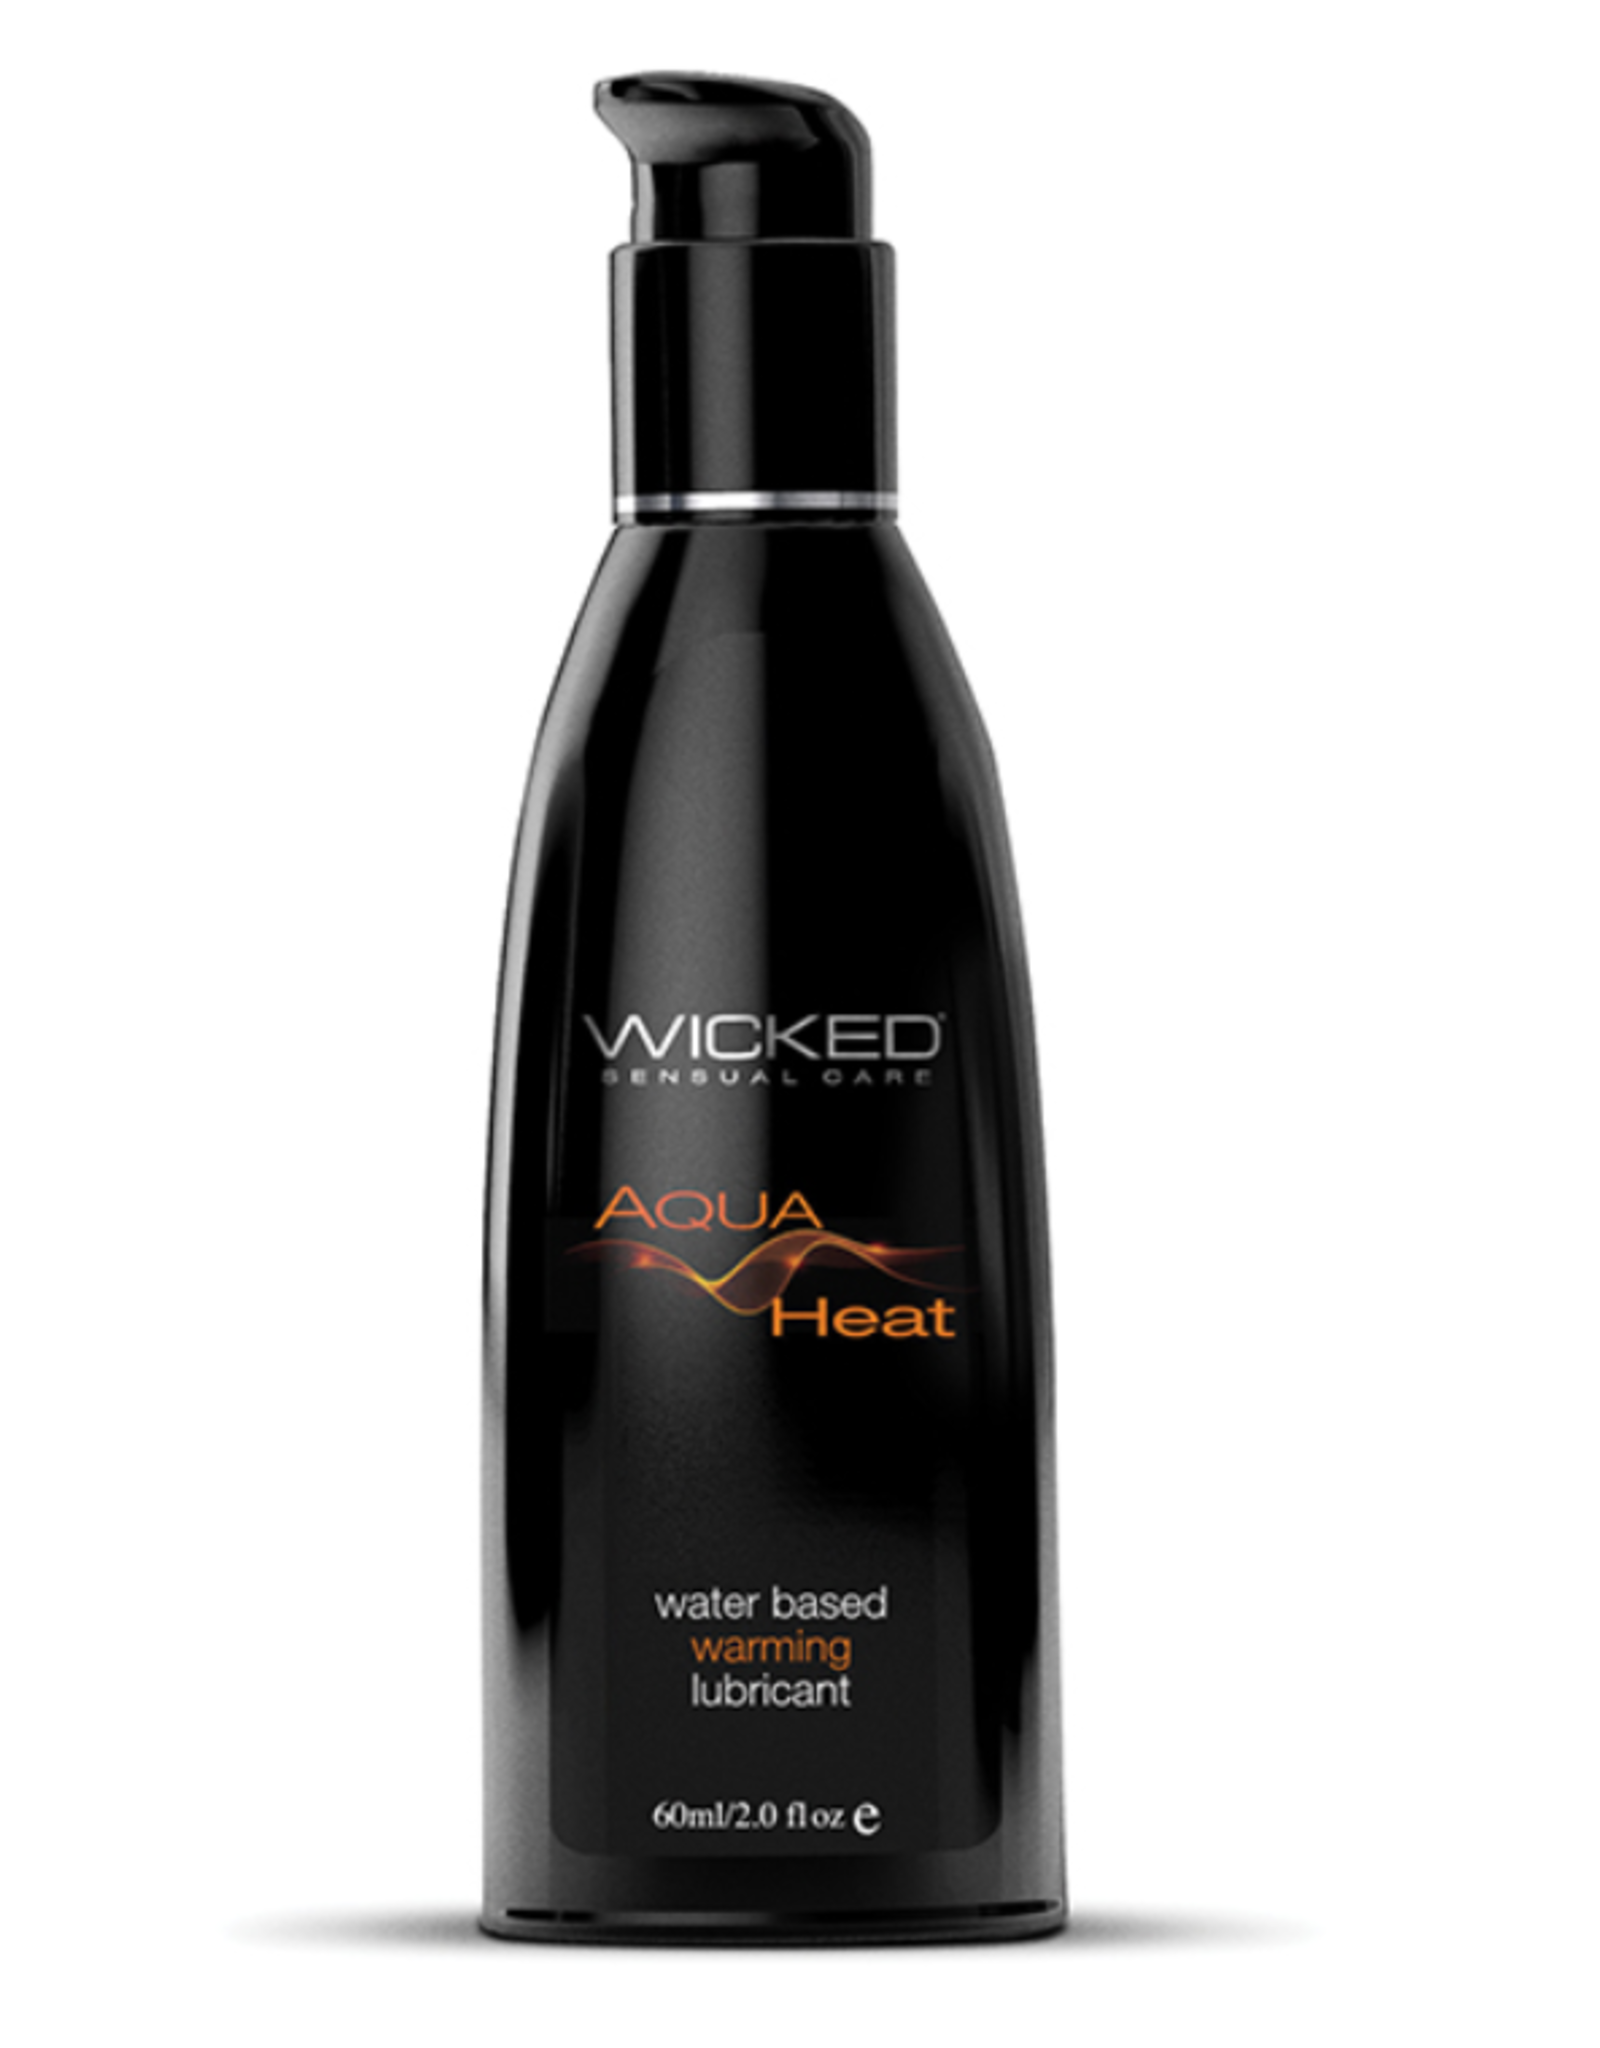 Wicked Sensual Care Heat Warming Sensation Water Based Lubricant - 2 oz